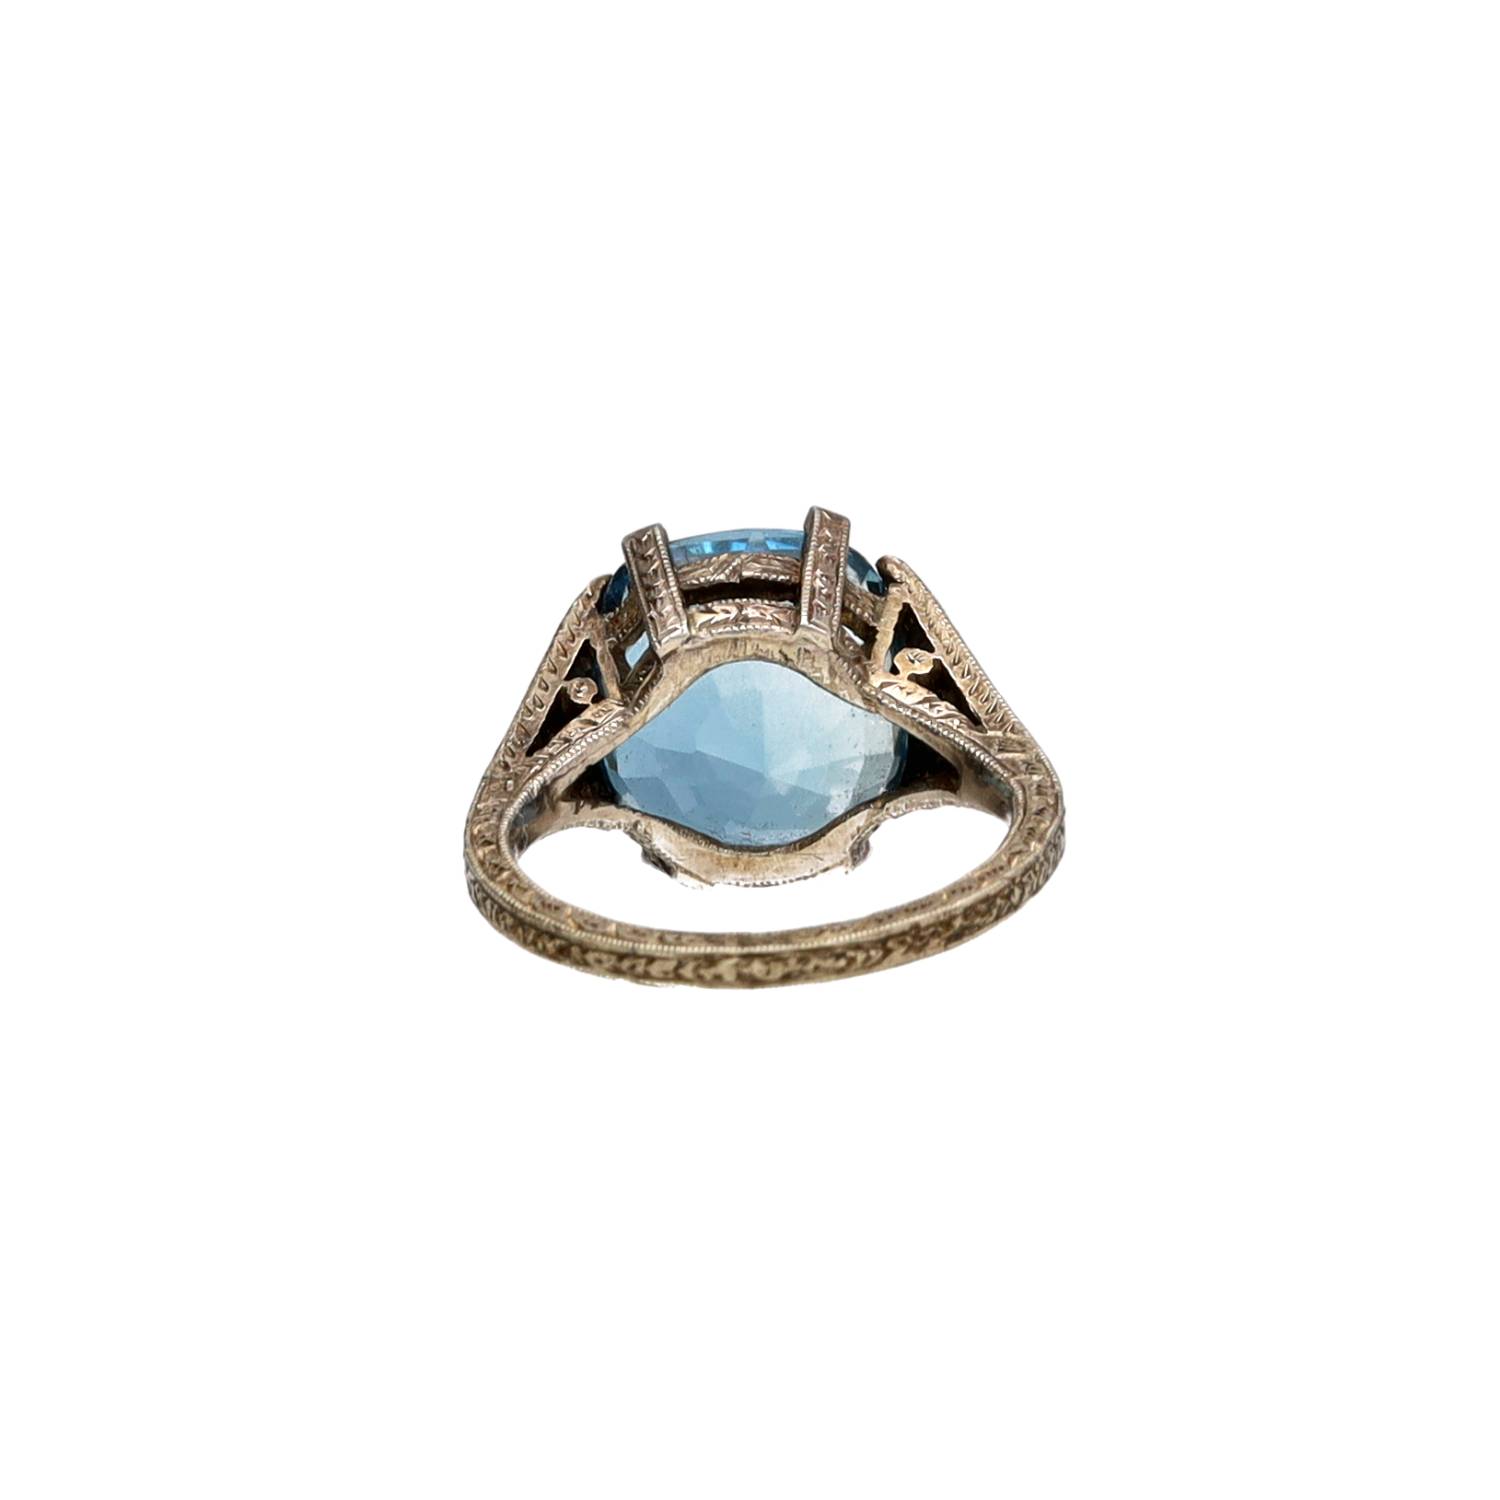 White metal patterned mount large blue topaz and diamond ring, width 13.5mm, 4.9gm, ring size H/I ( - Image 2 of 4